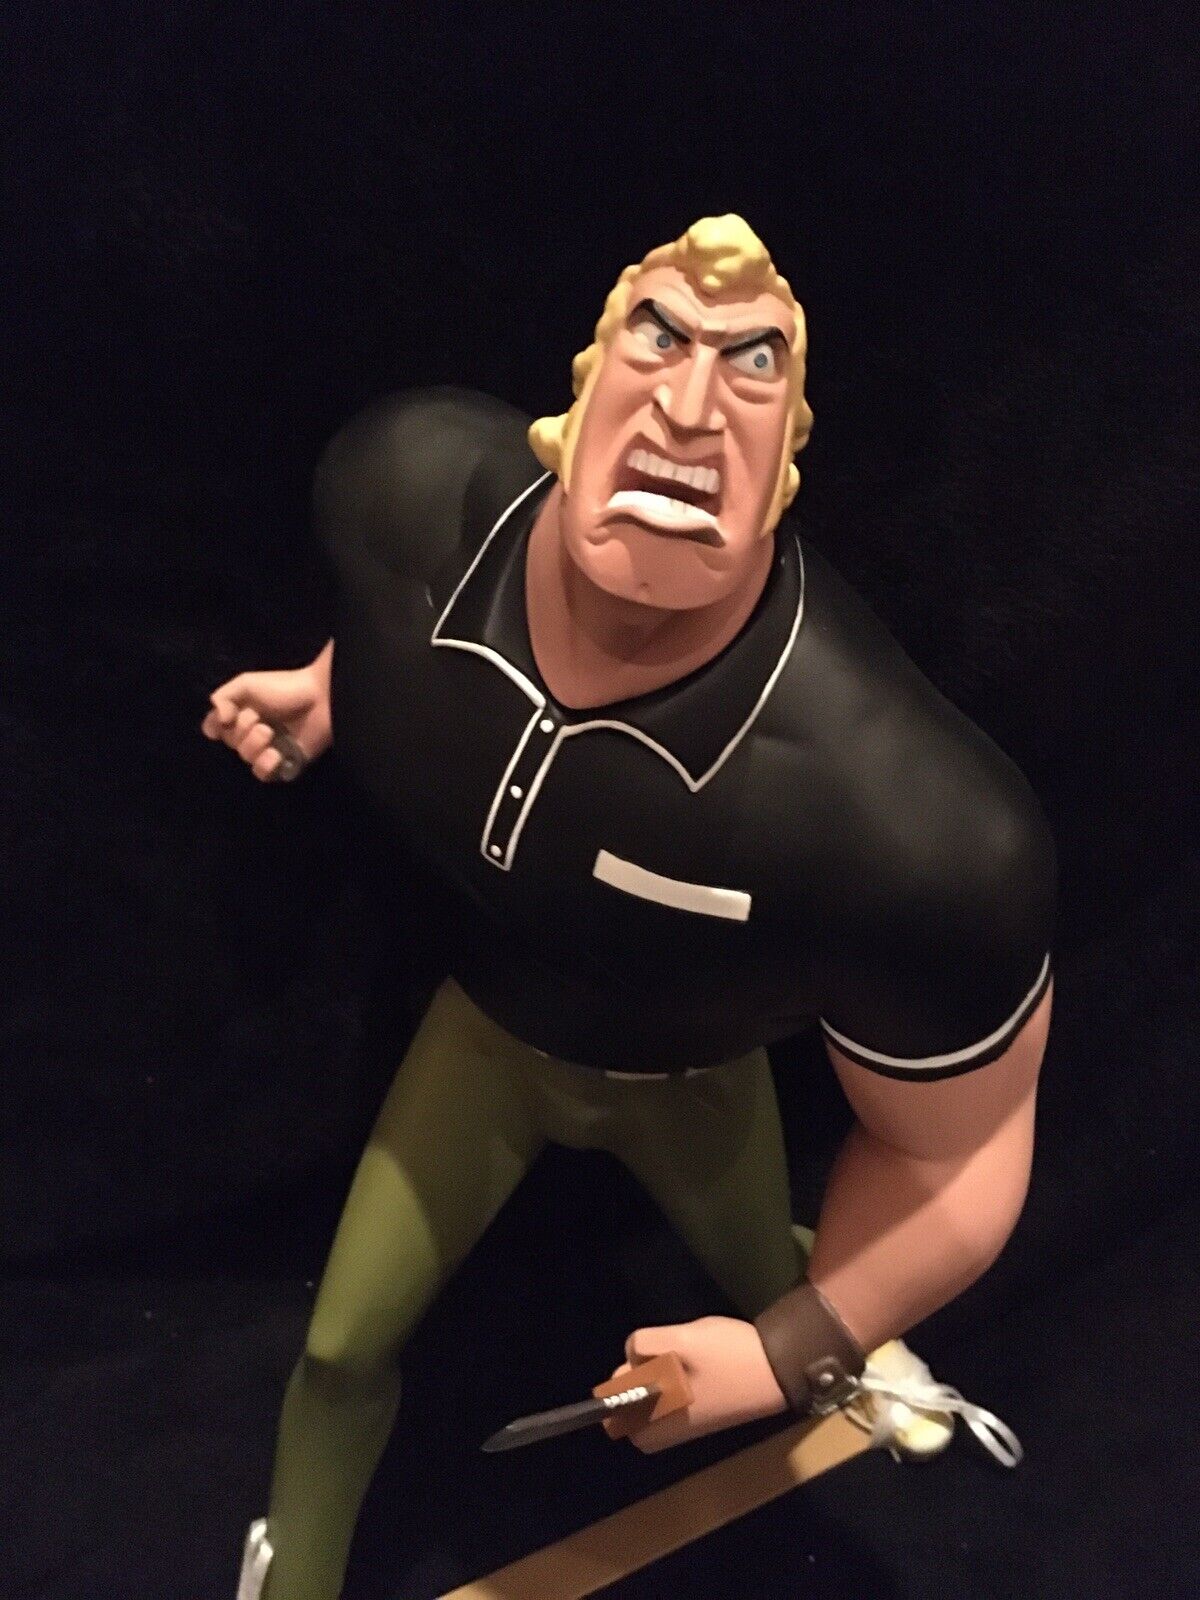 THE VENTURE BROTHERS - BROCK SAMPSON SIDESHOW MAQUETTE - EXCLUSIVE #165/250